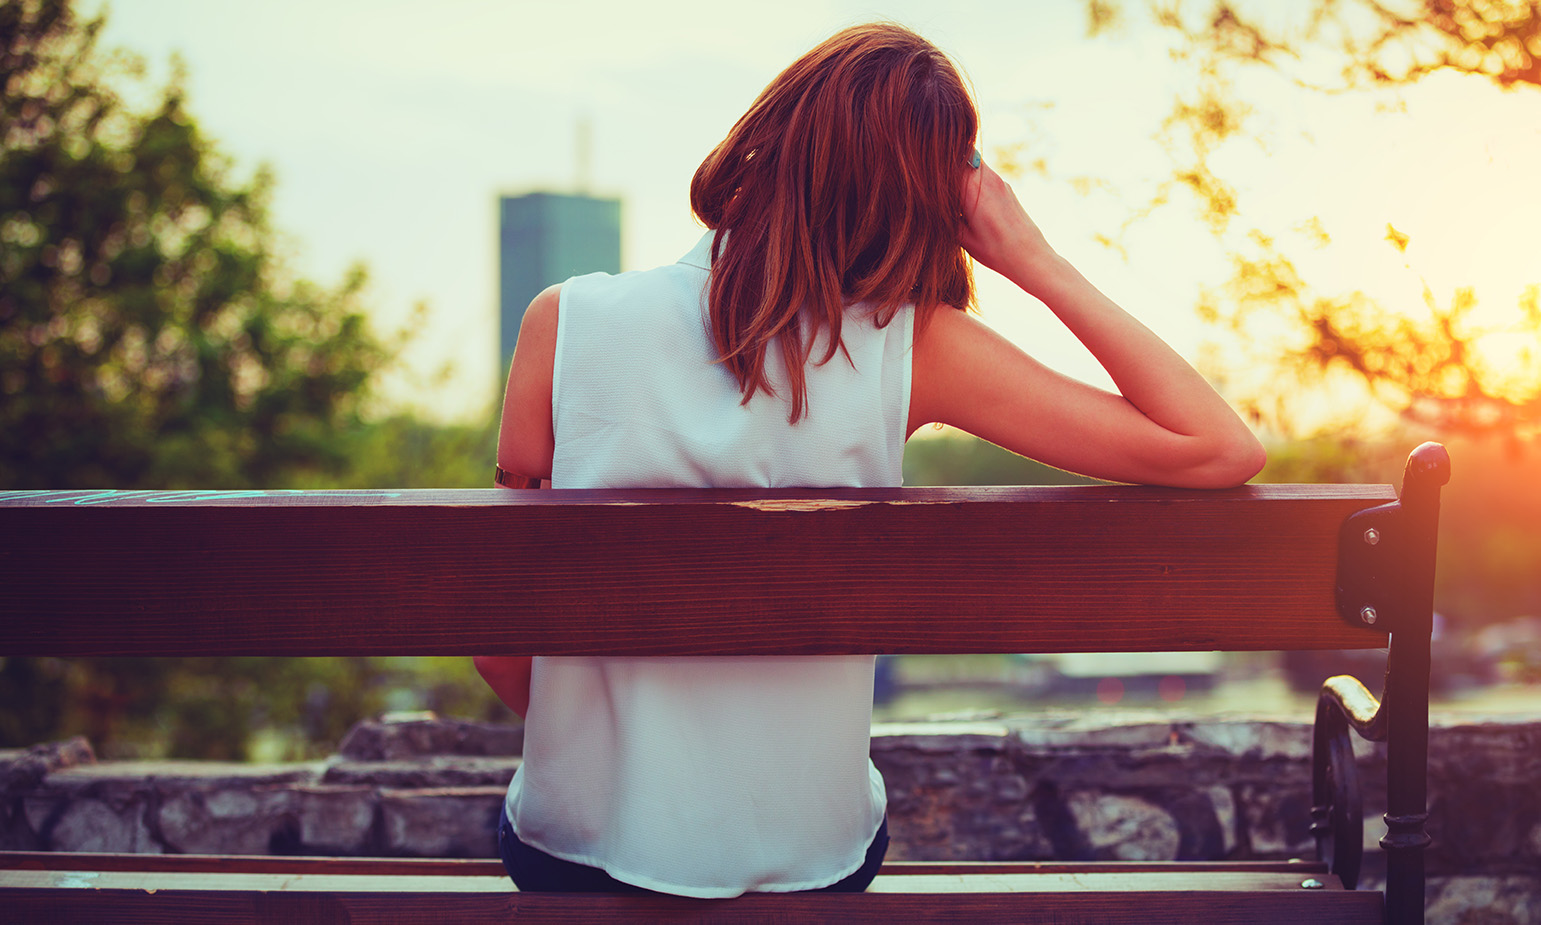 View from behind of woman sitting on park bench